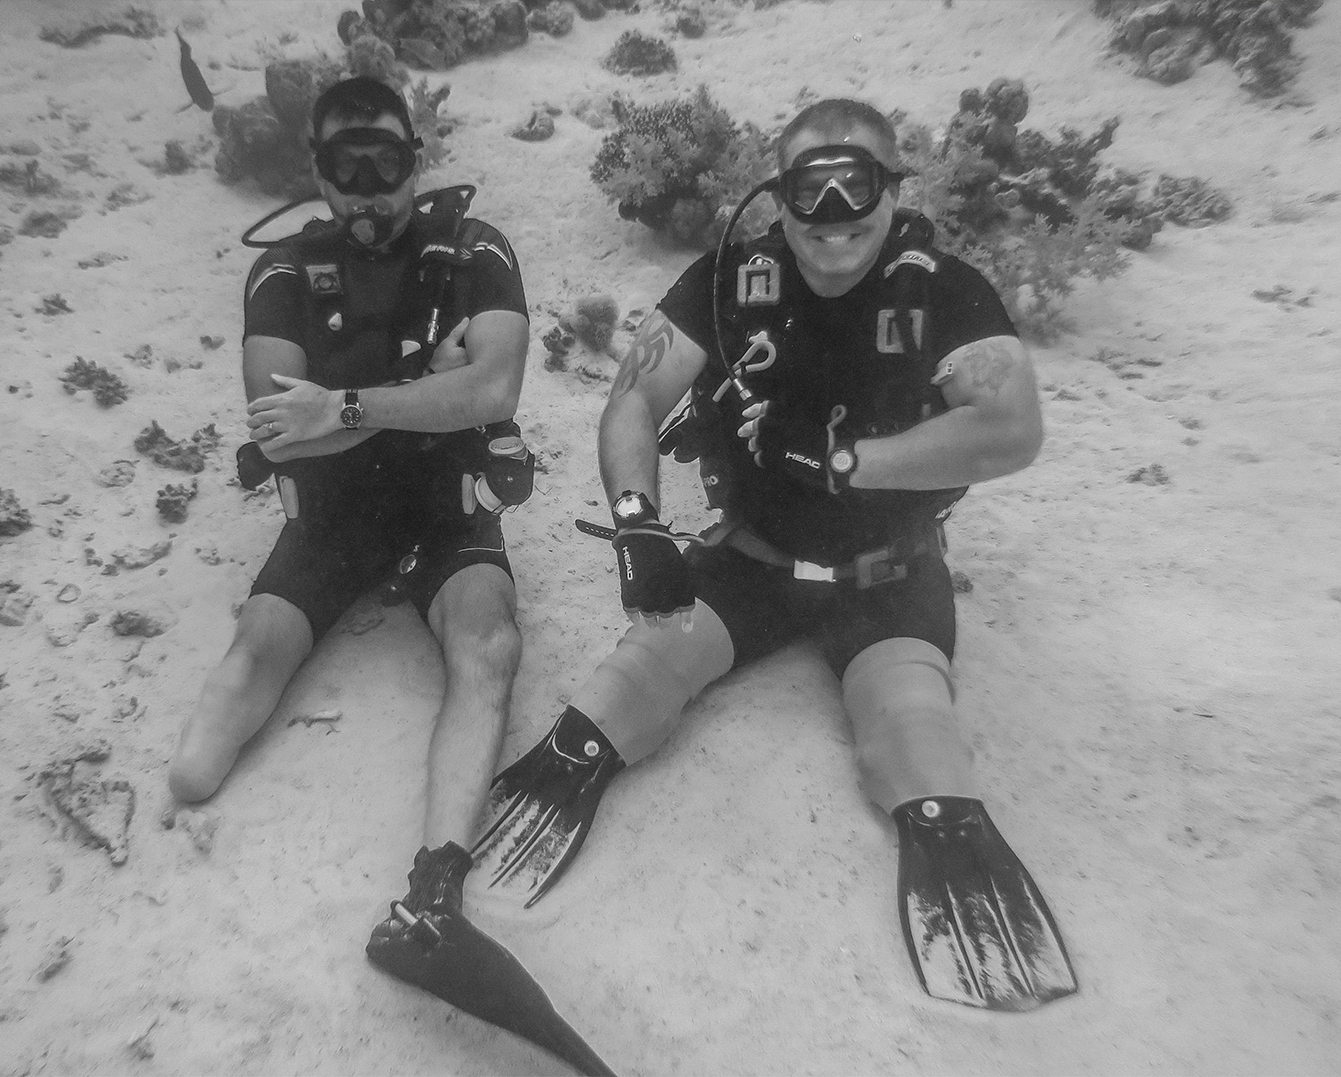 Two divers sat on sandy bottom